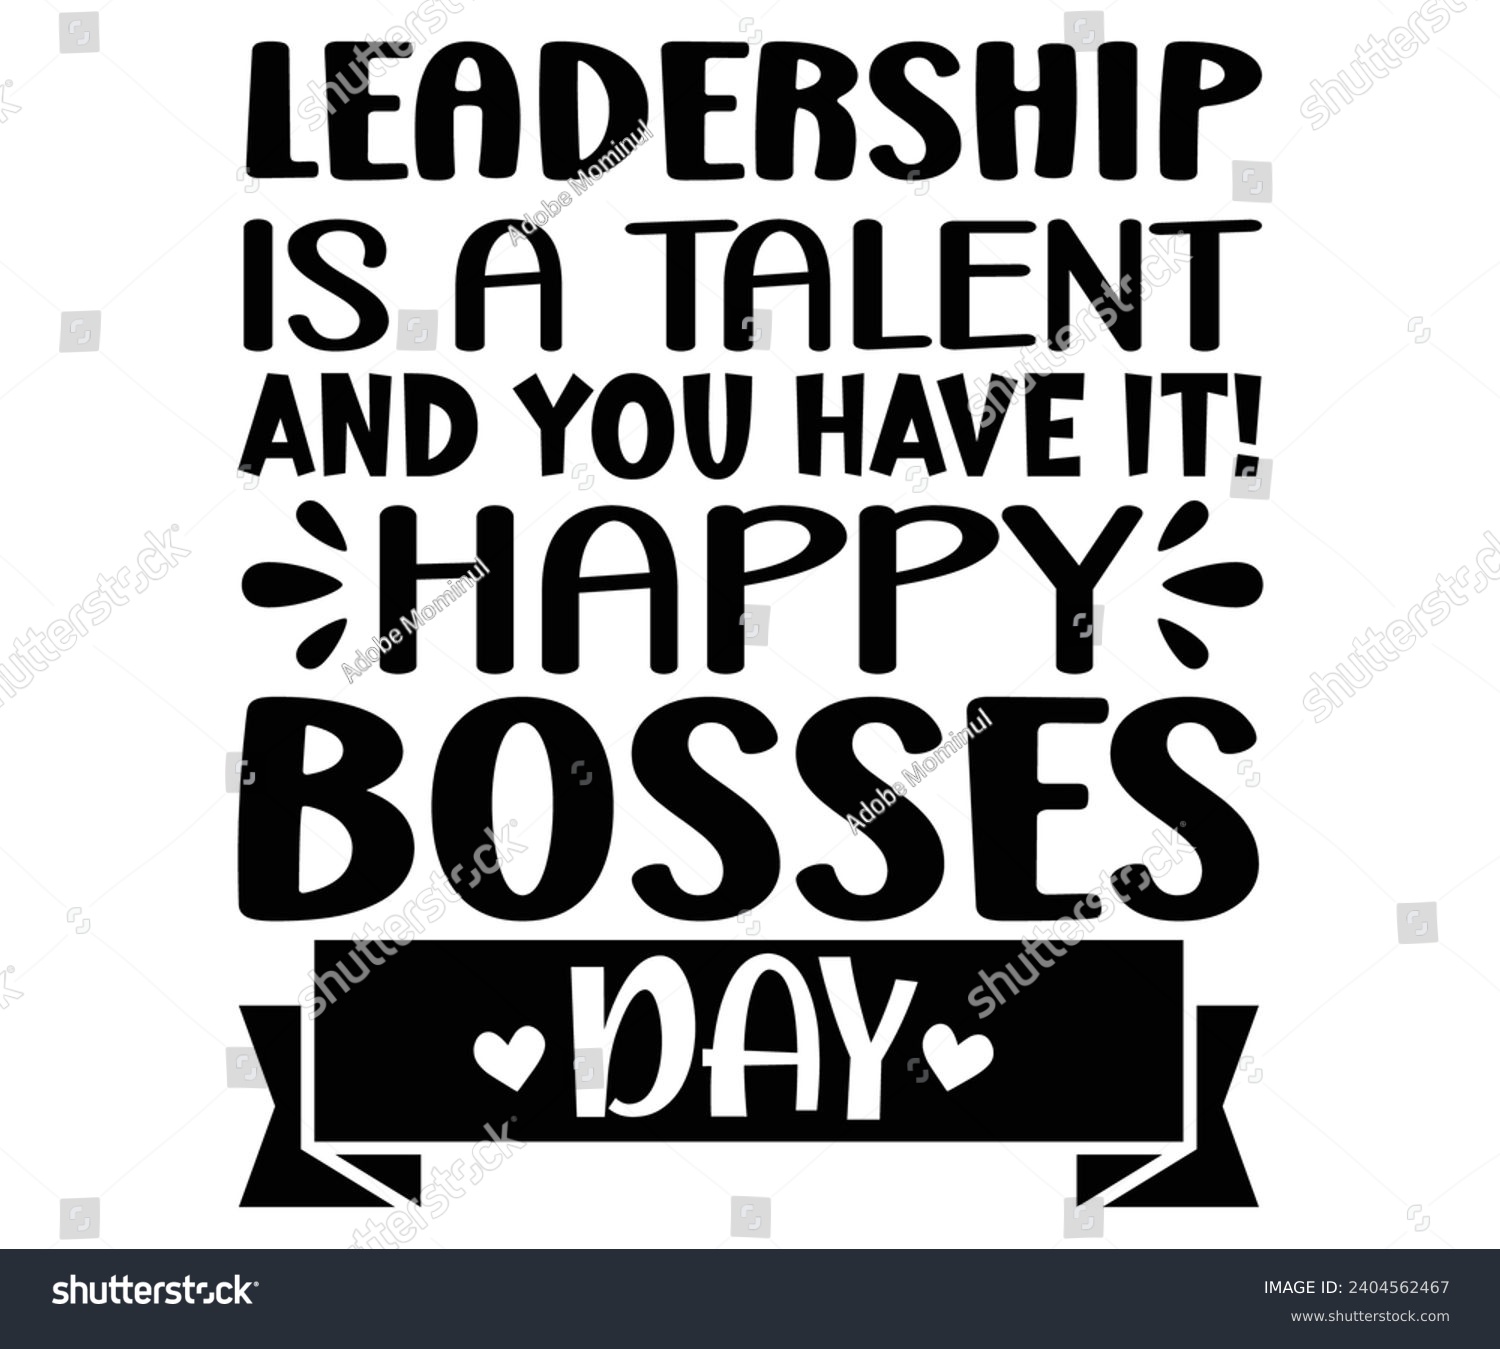 SVG of Leadership is a talent and you have it! Happy Bosses Day svg,Happy Bosses Day svg,Happy Boss Svg,Boss Saying Quotes,Boss Day T-shirt,Gift for Boss,Great Jobs,Happy Bosses Day t-shirt,Girl Boss, svg